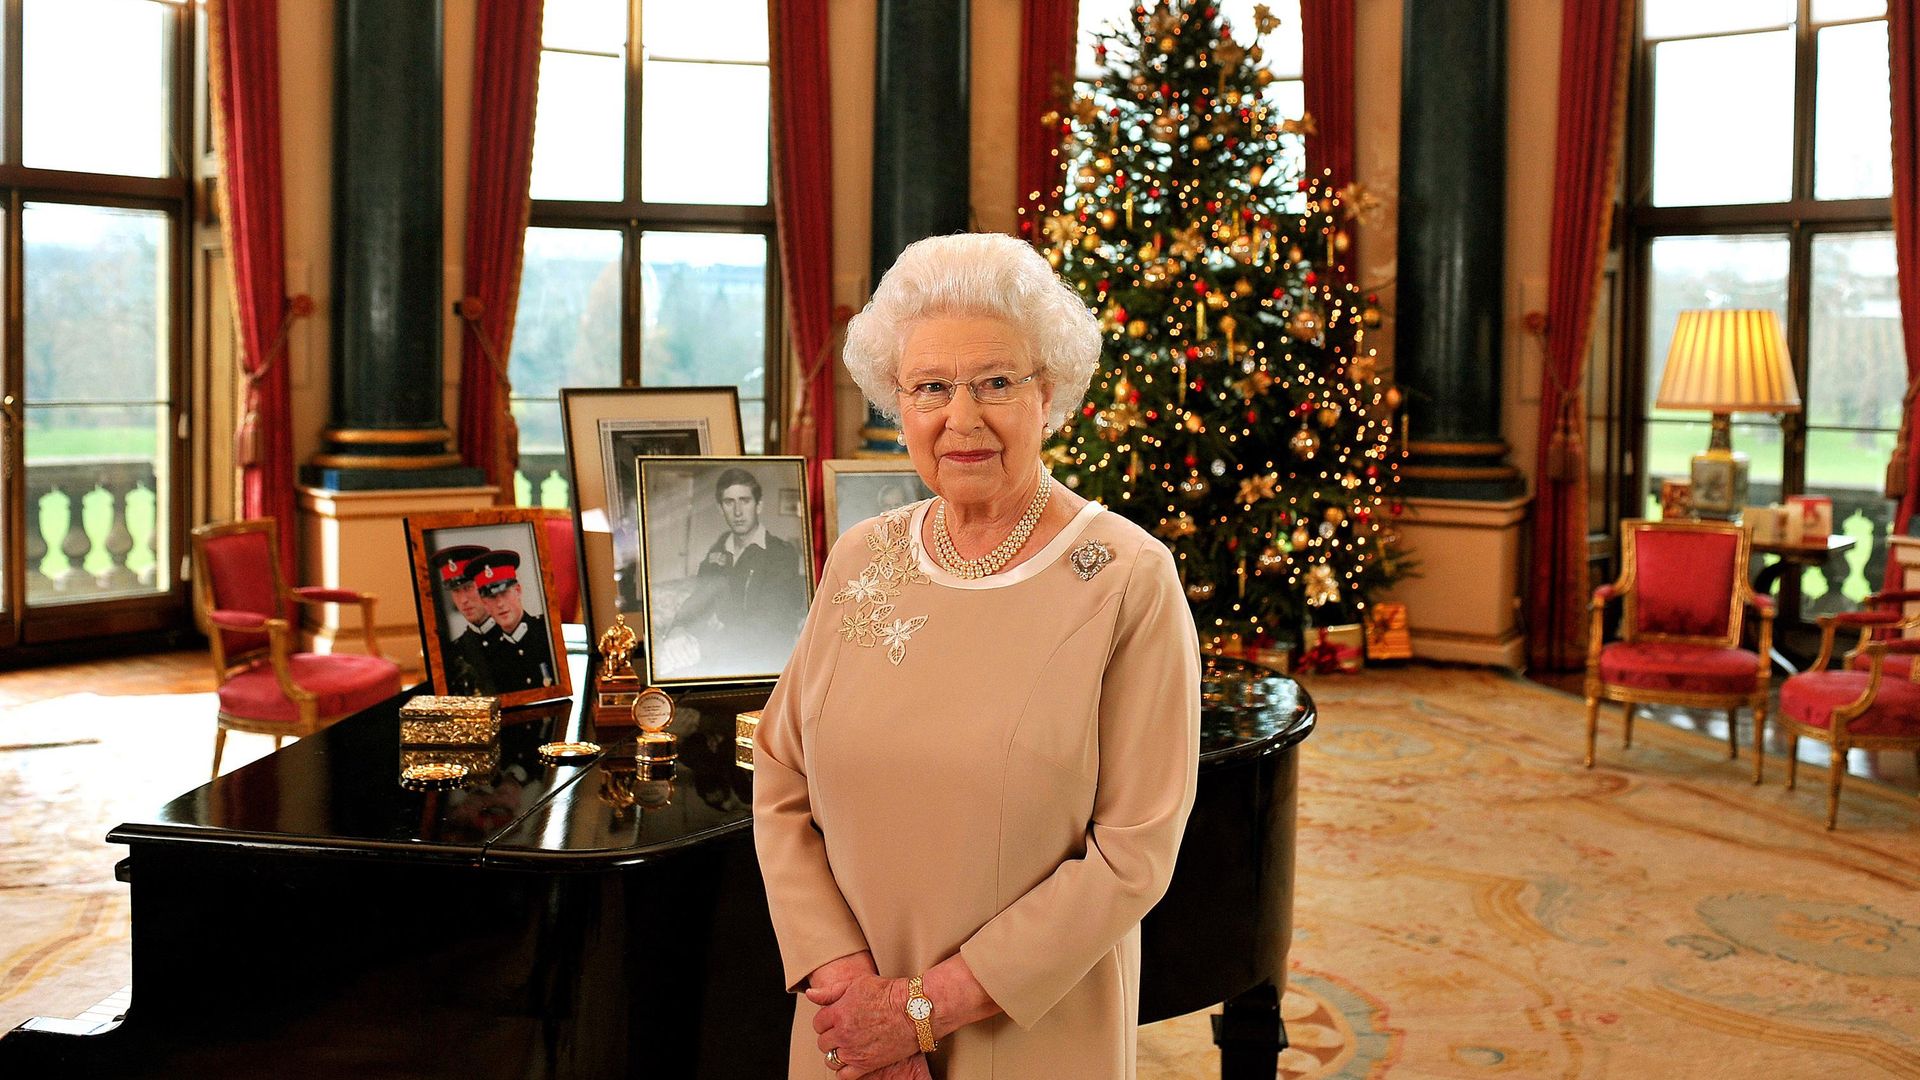 The Queen standing in front of a piano and a Christmas tree